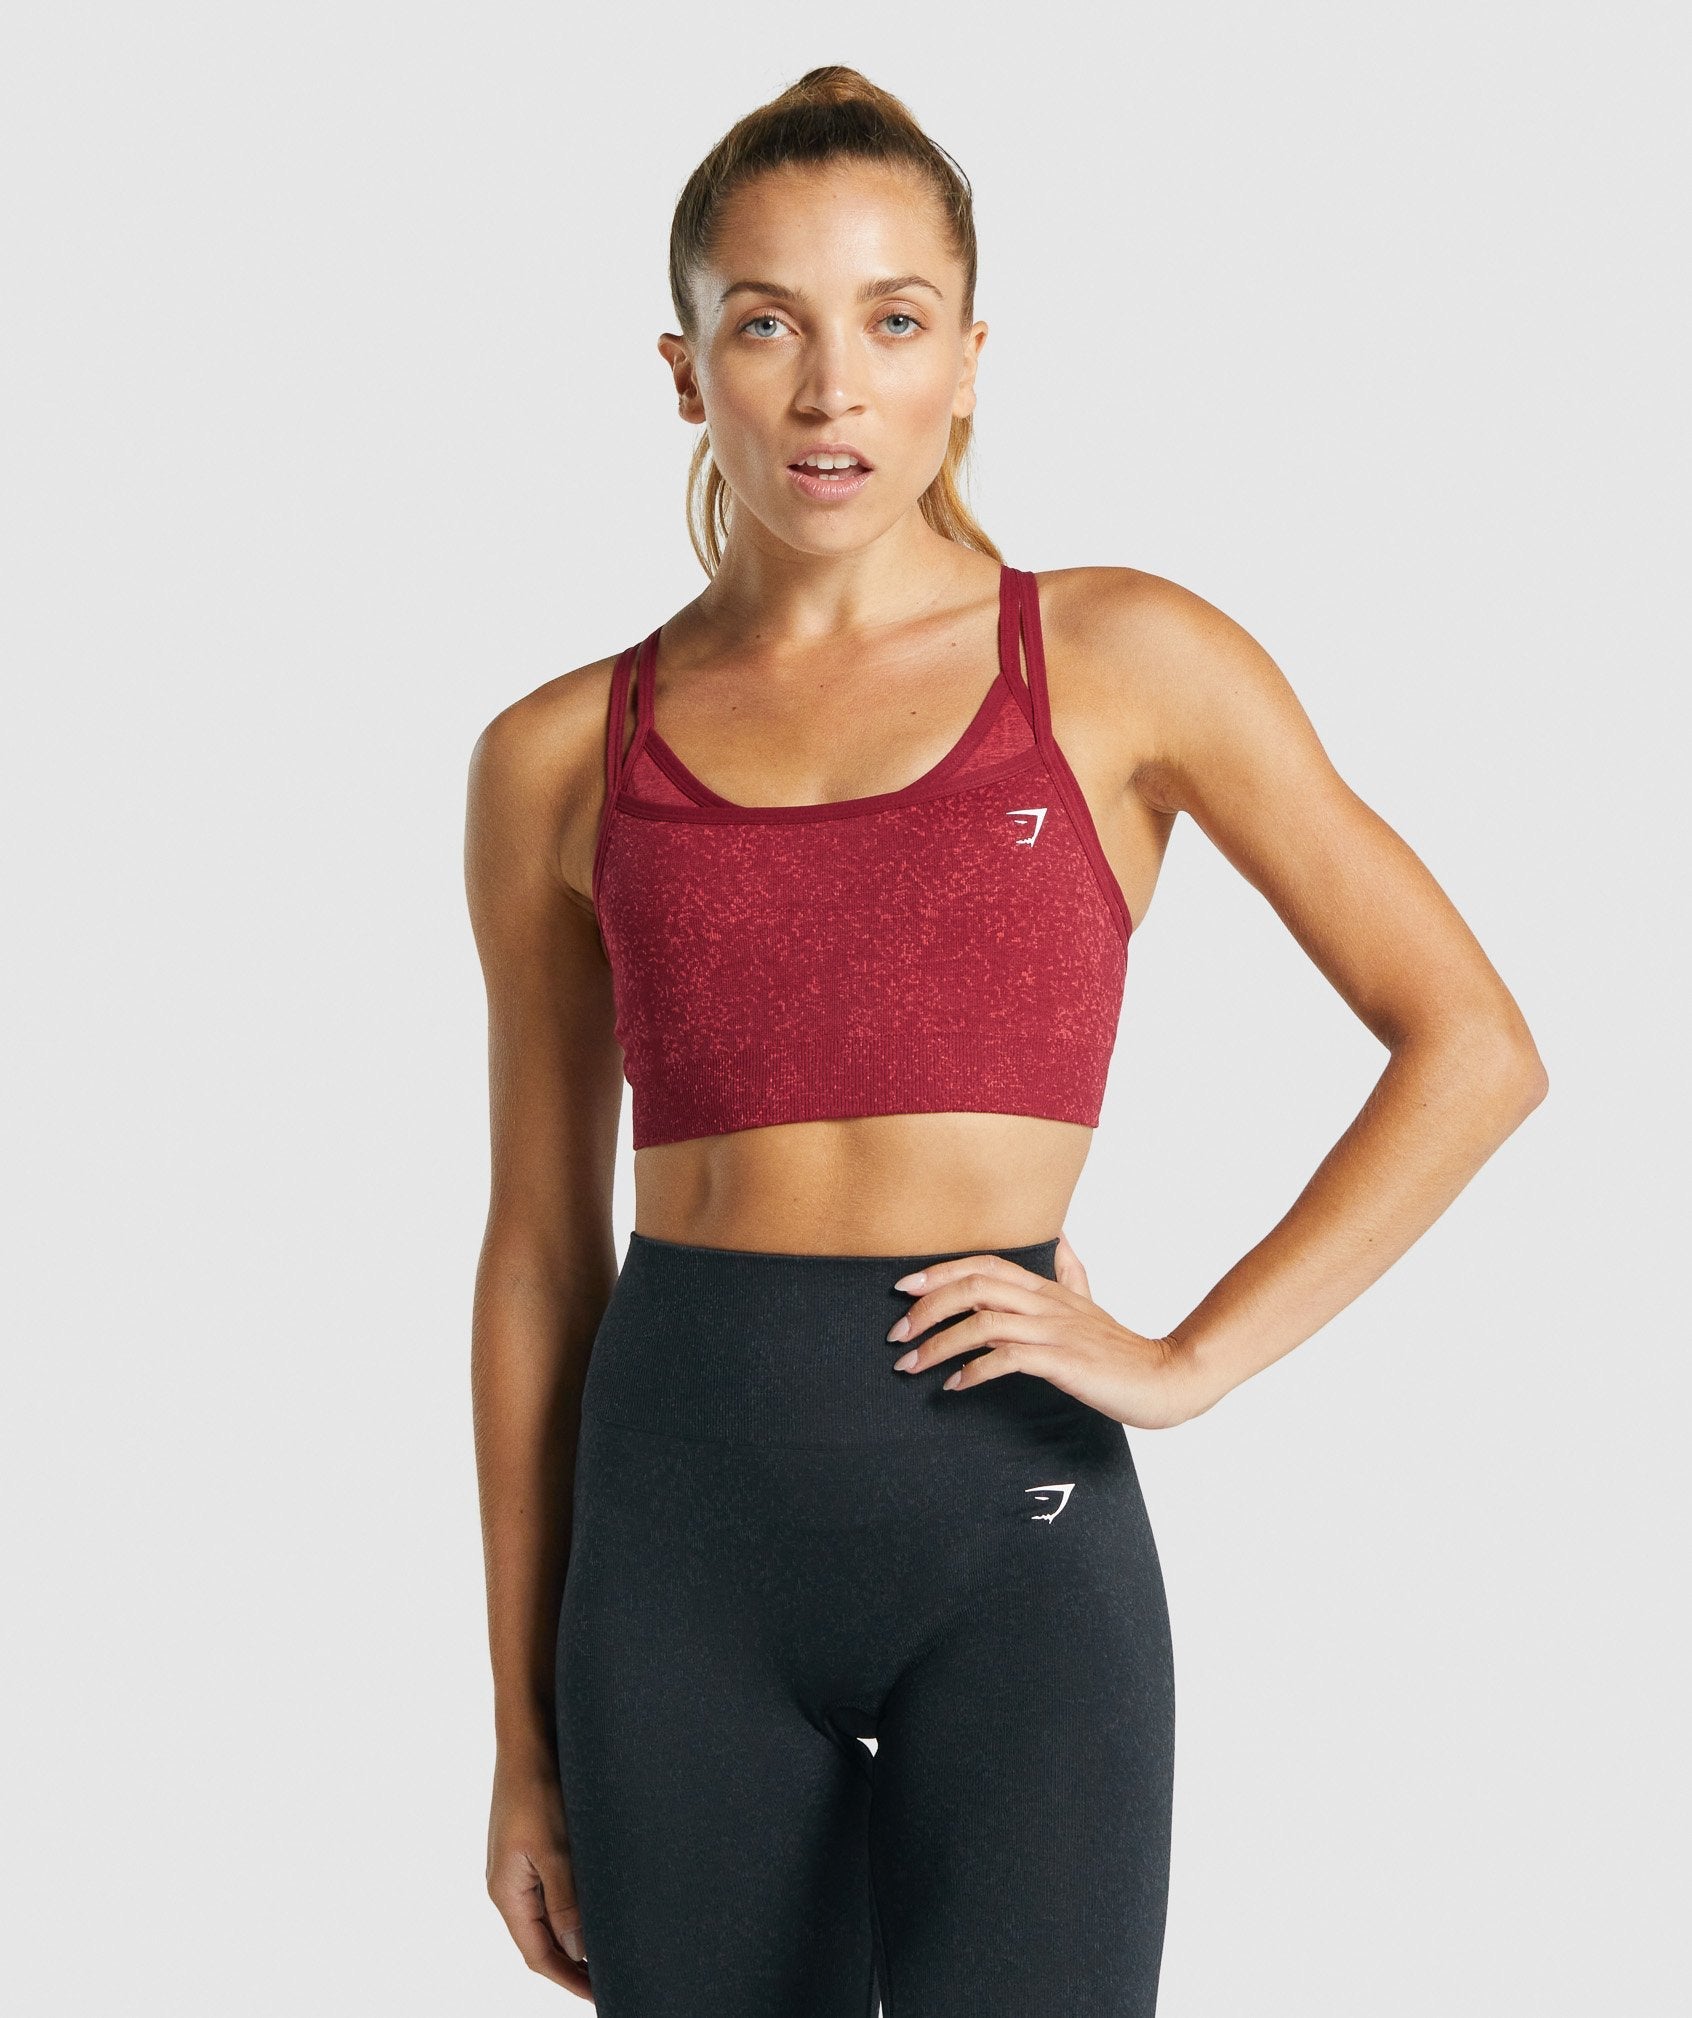 Buy Fabluk® FlexiFit Nylon Spandex Tube Sports Bra - Non-Padded, Wire-Free  Comfort & Seamless (Free Size, Ballet Pink) at